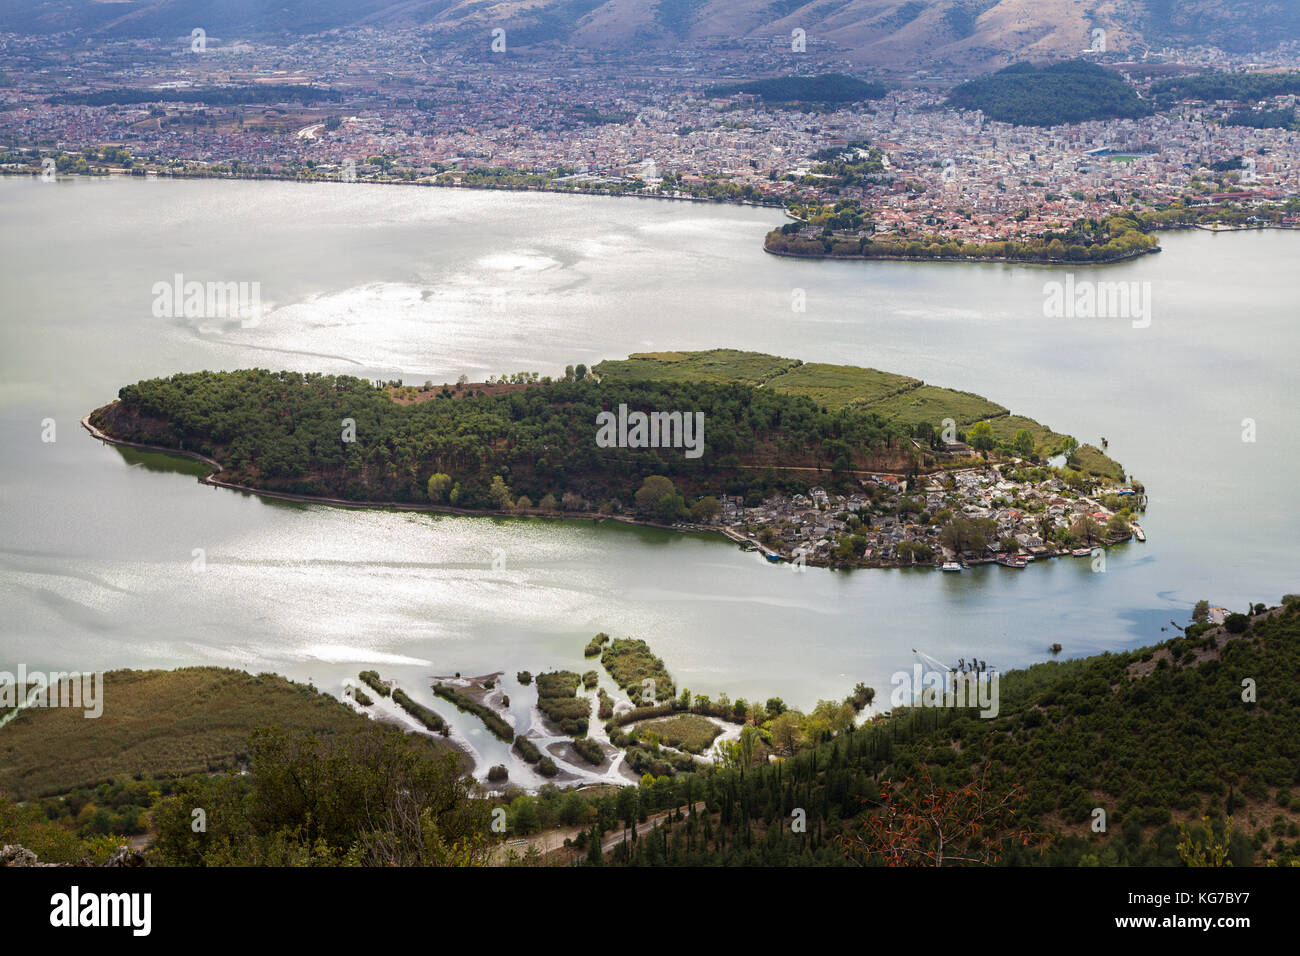 Beautiful view of Ioannina lake from Ligkiades mountain village with the lake island in the foreround and Ioannina city in the background Stock Photo